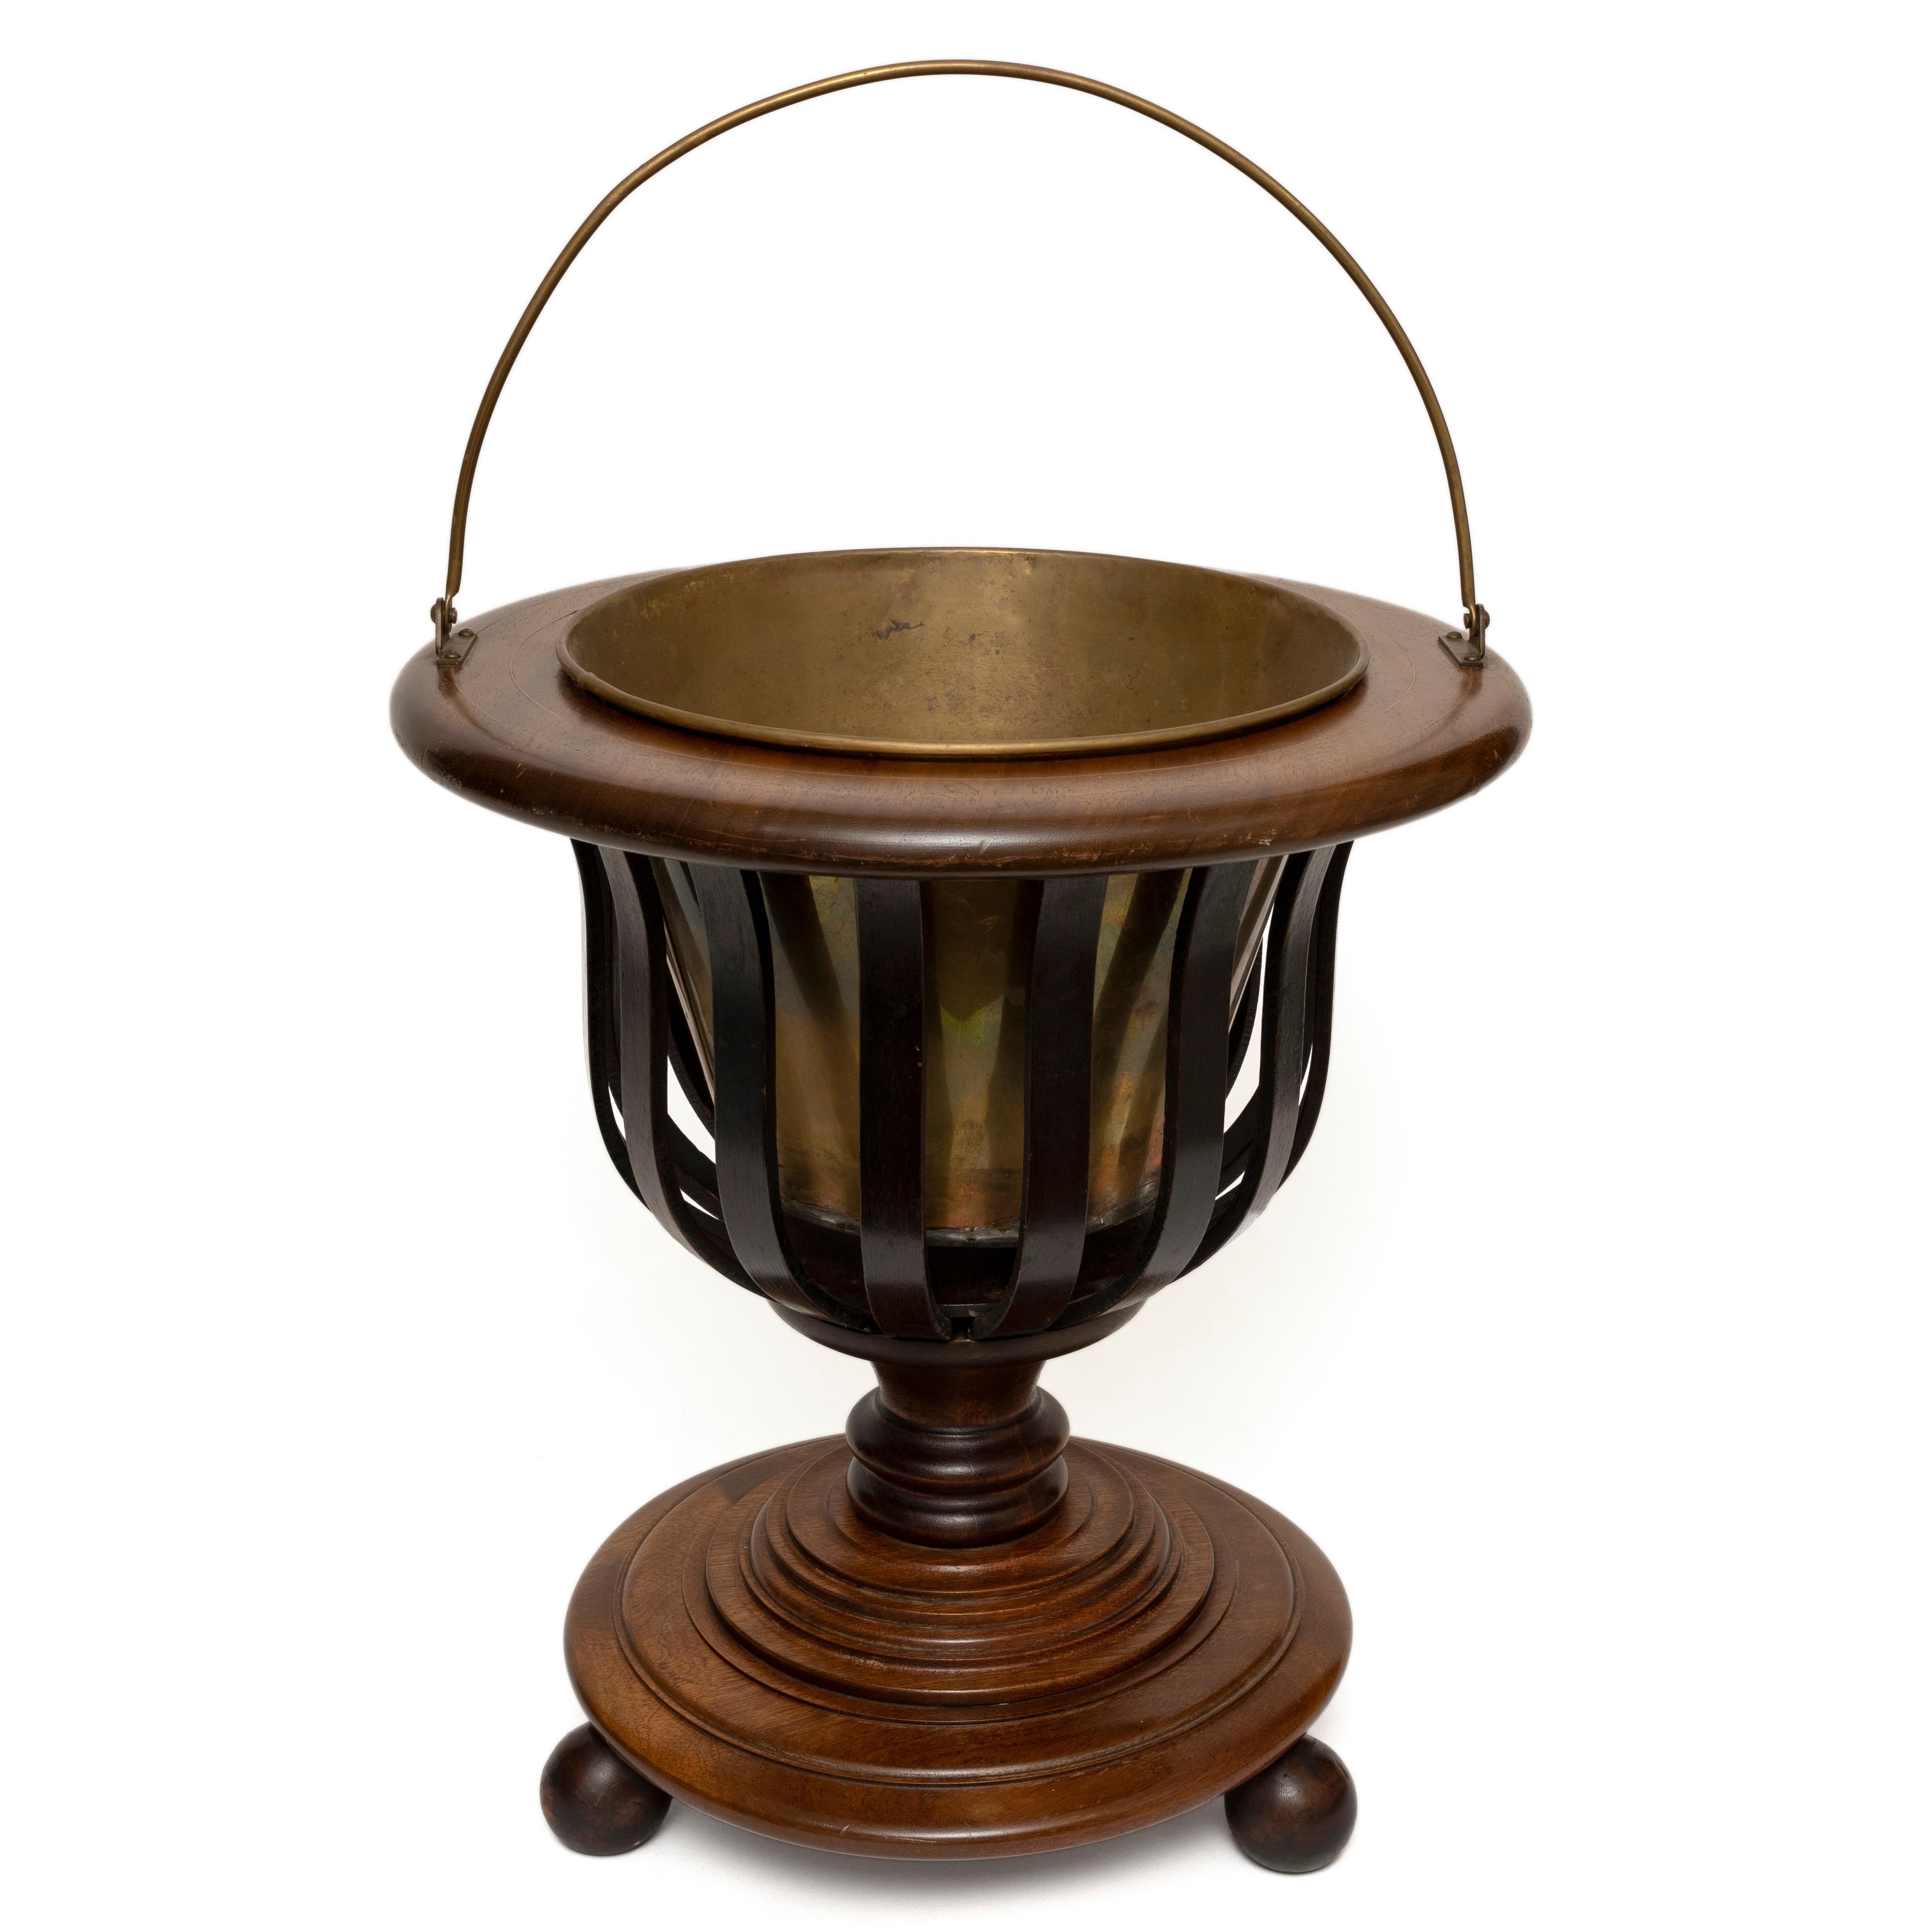 Elegant Urn Shaped Georgian Revival Wine Cooler or Jardiniere with Original Brass Bucket
Elegant vase shape with curved slats allowing the brass of the bucket to be seen and also reflect light
The removable original brass bucket most likely intended